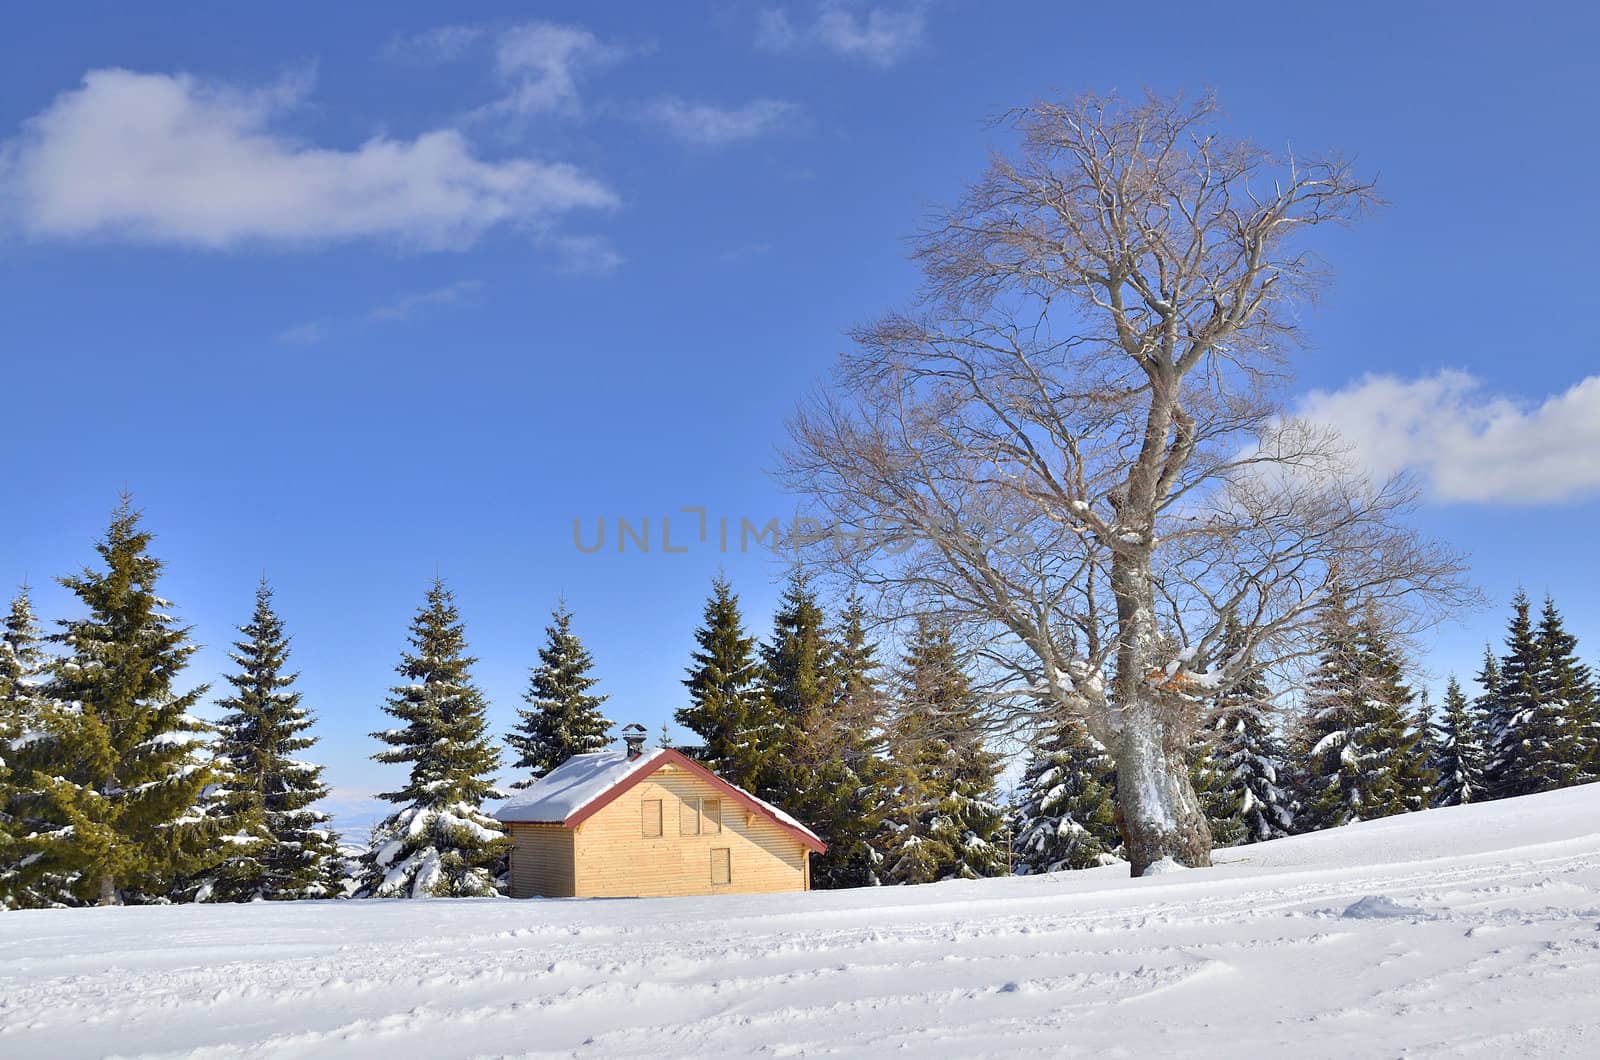 snow landscape with wooden house and green pine and no leafs trees